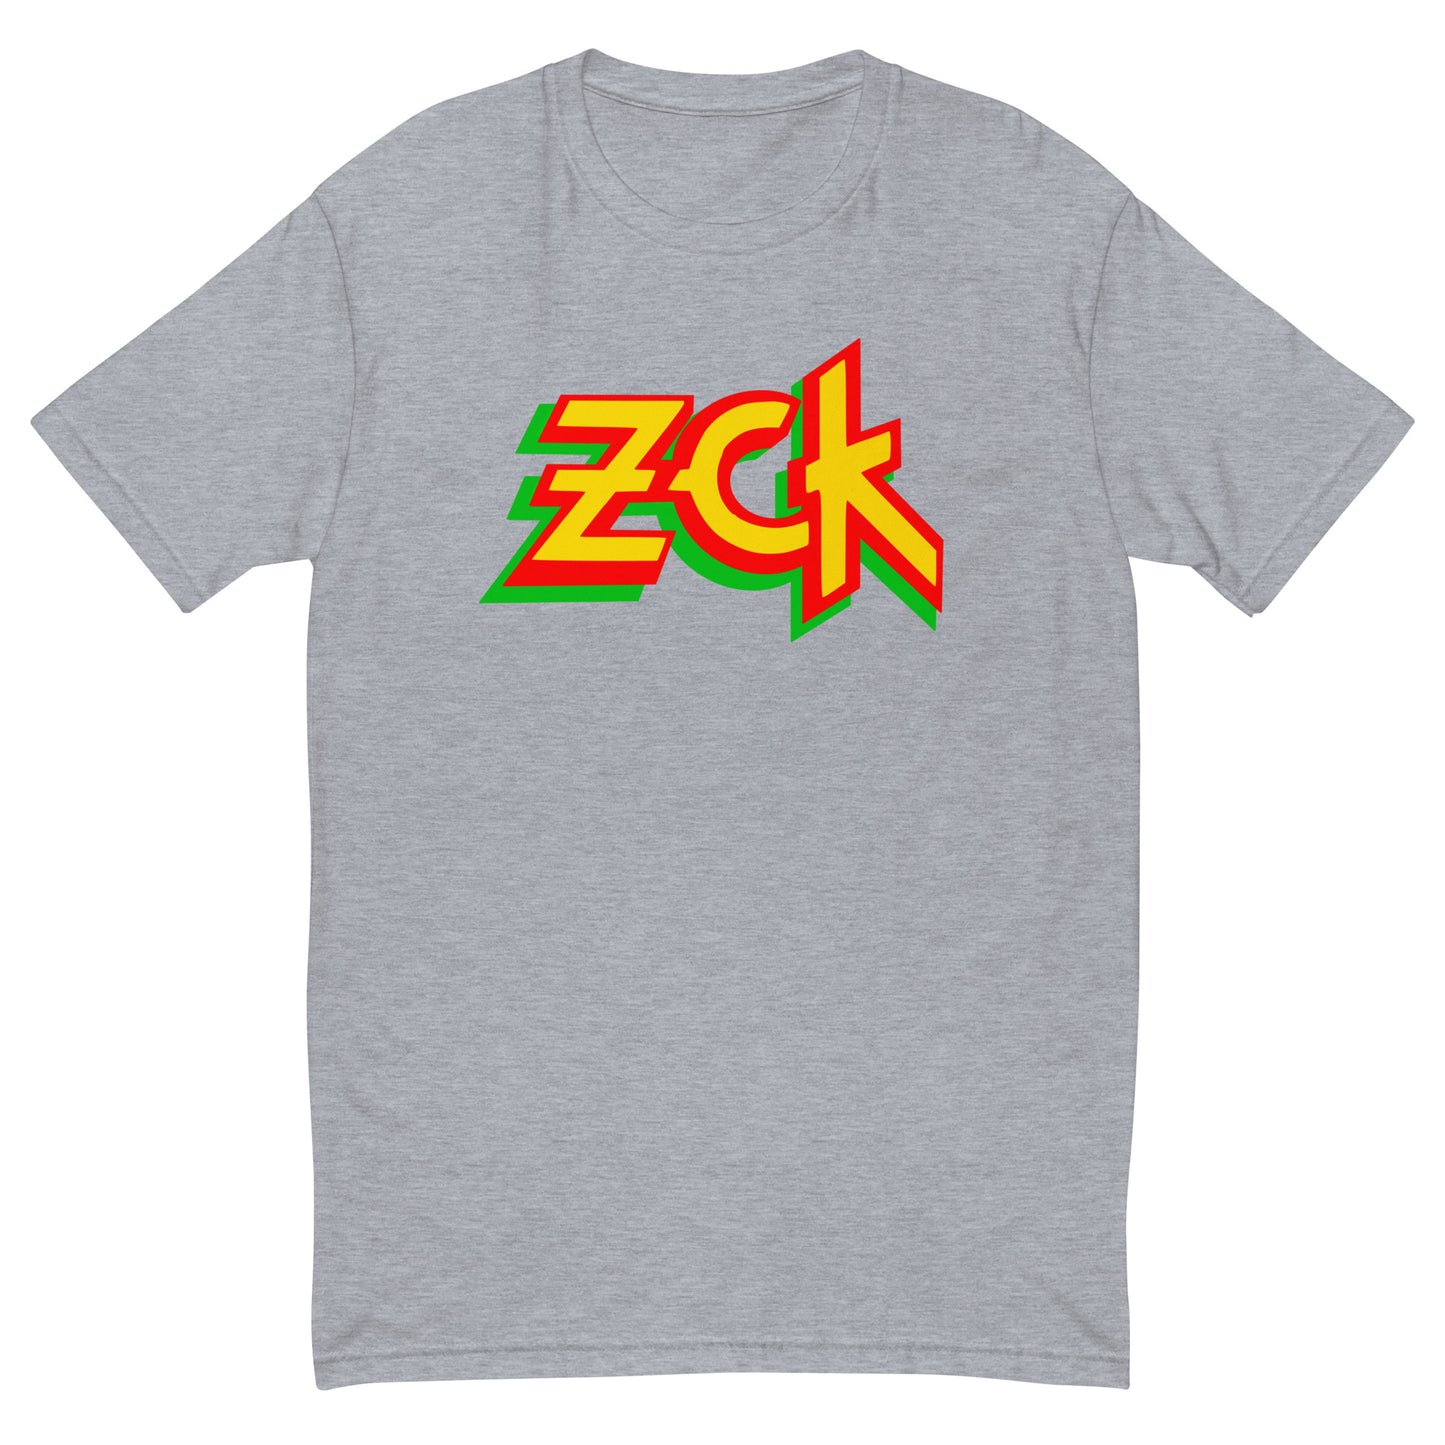 "Ozzy ZCK"